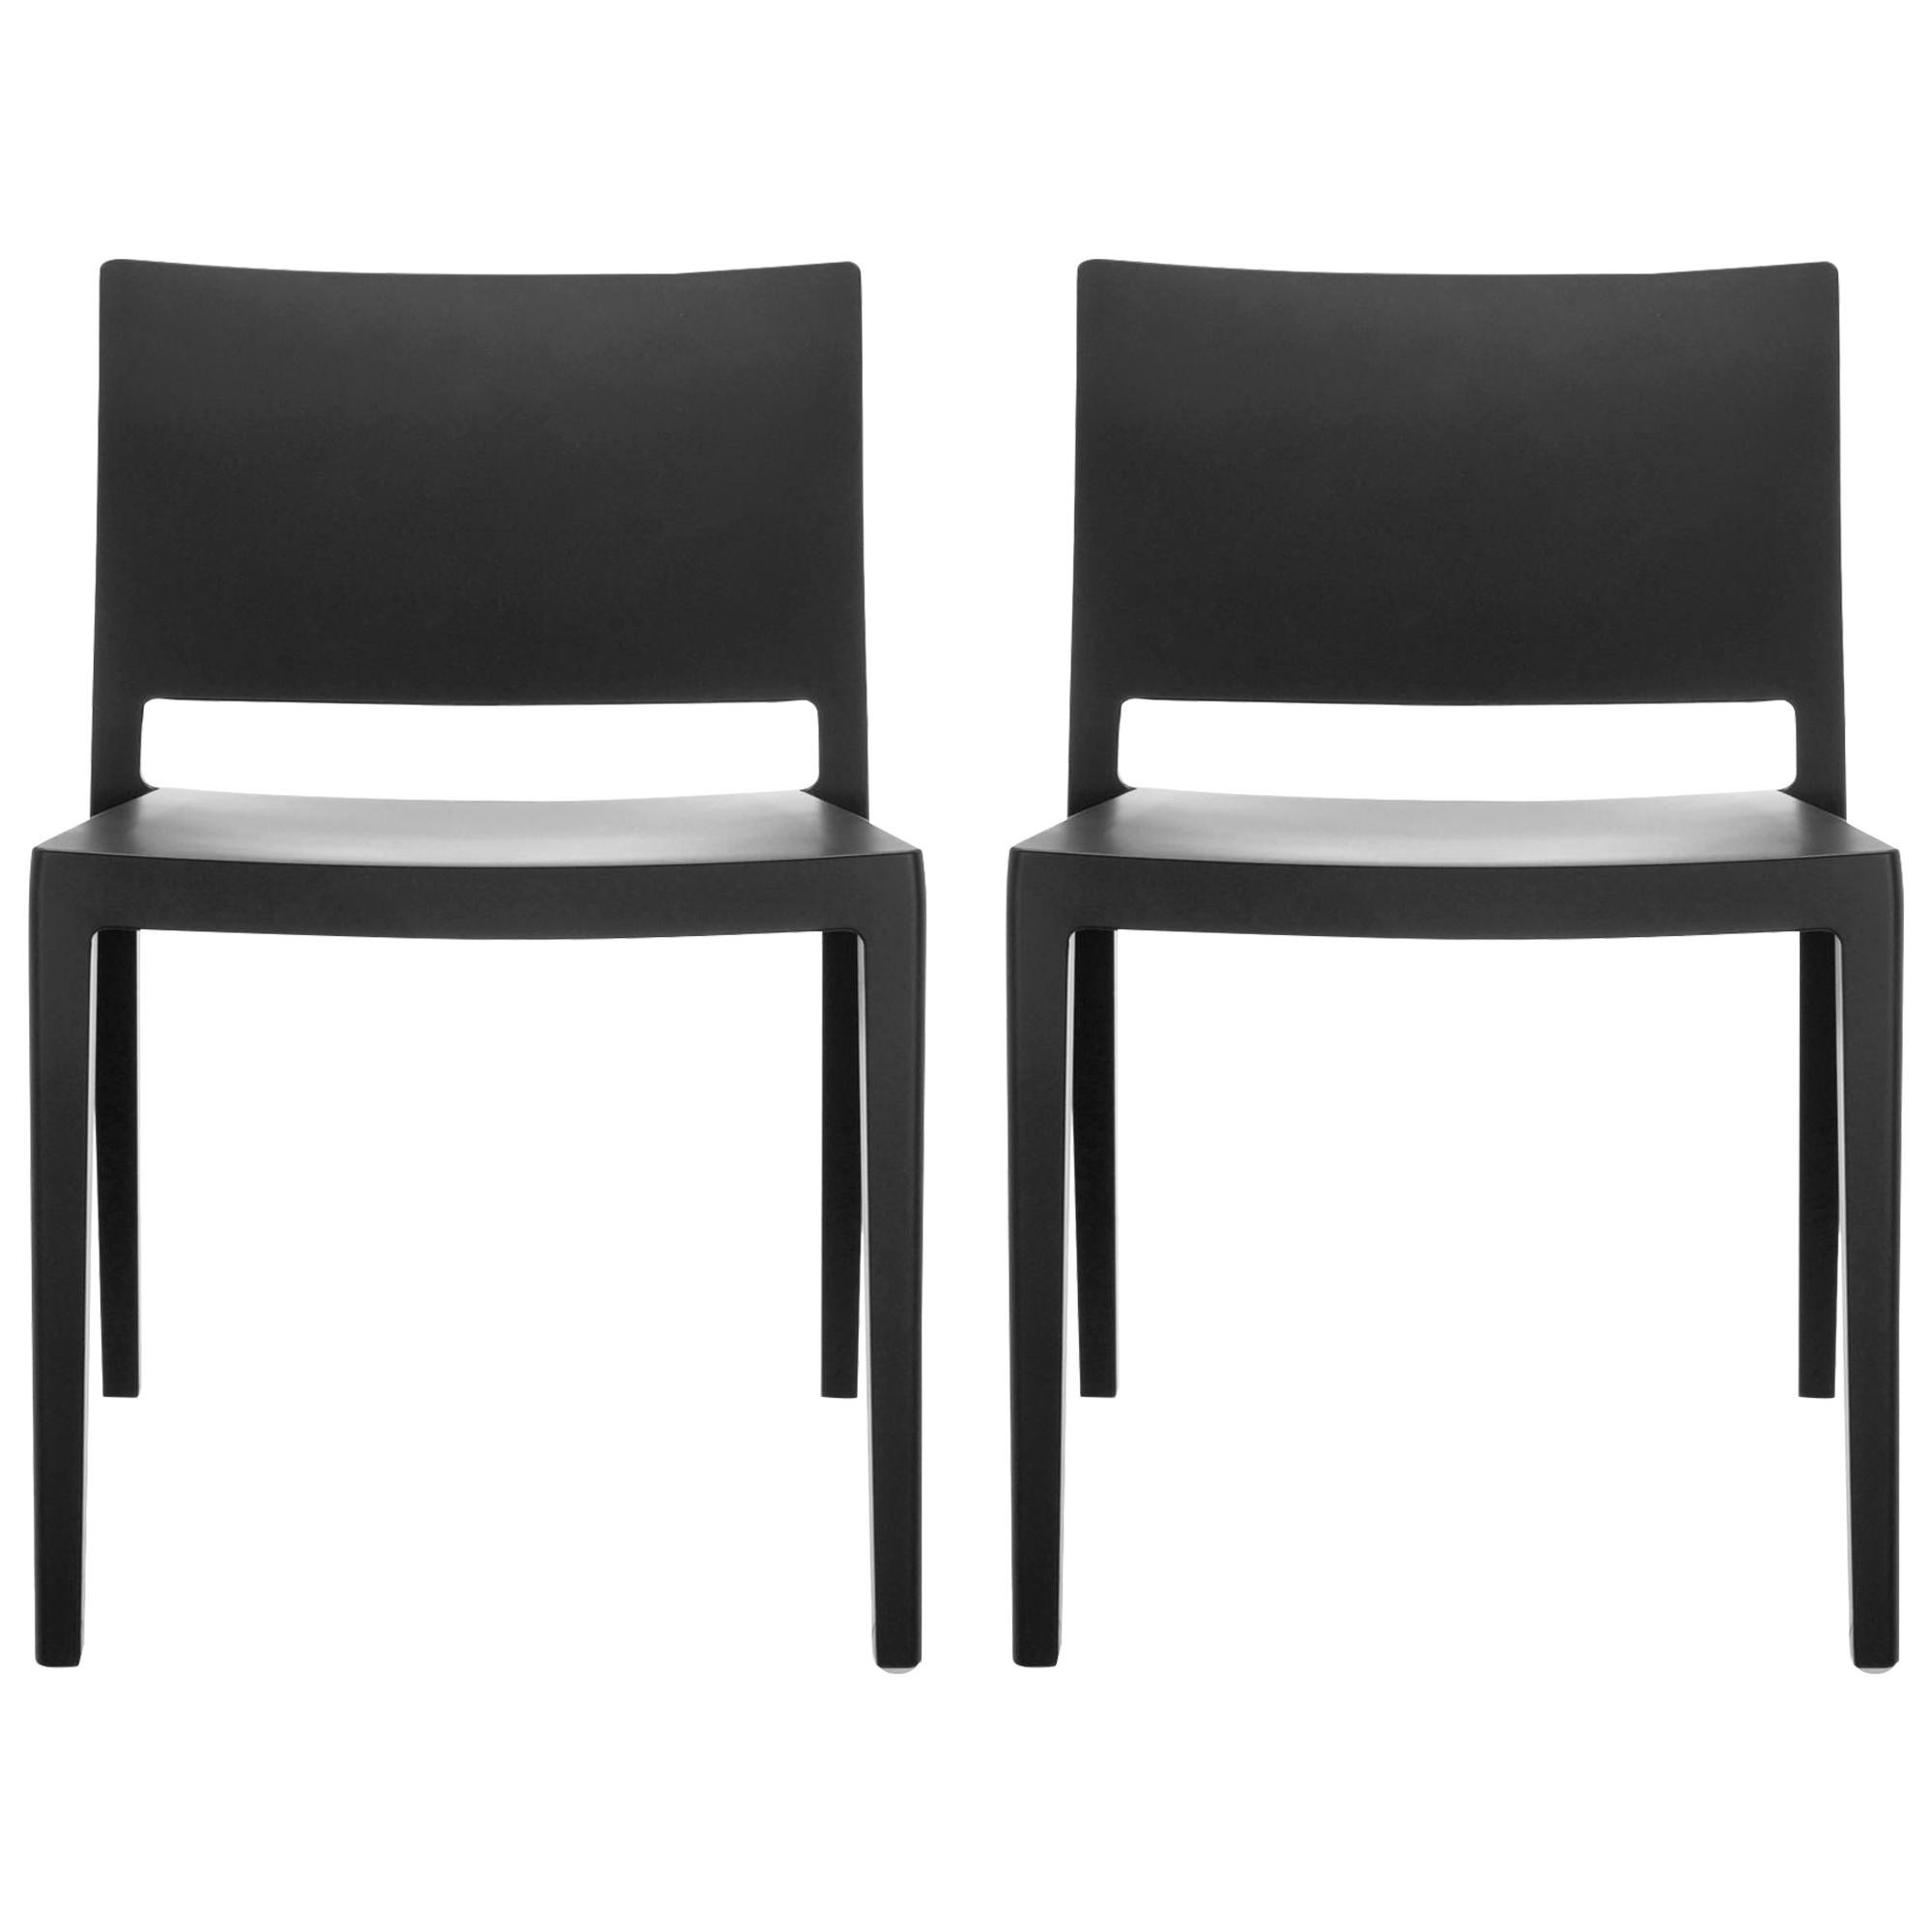 Set of 2 Kartell Lizz Mat Chairs in Black by Patricia Urquiola For Sale